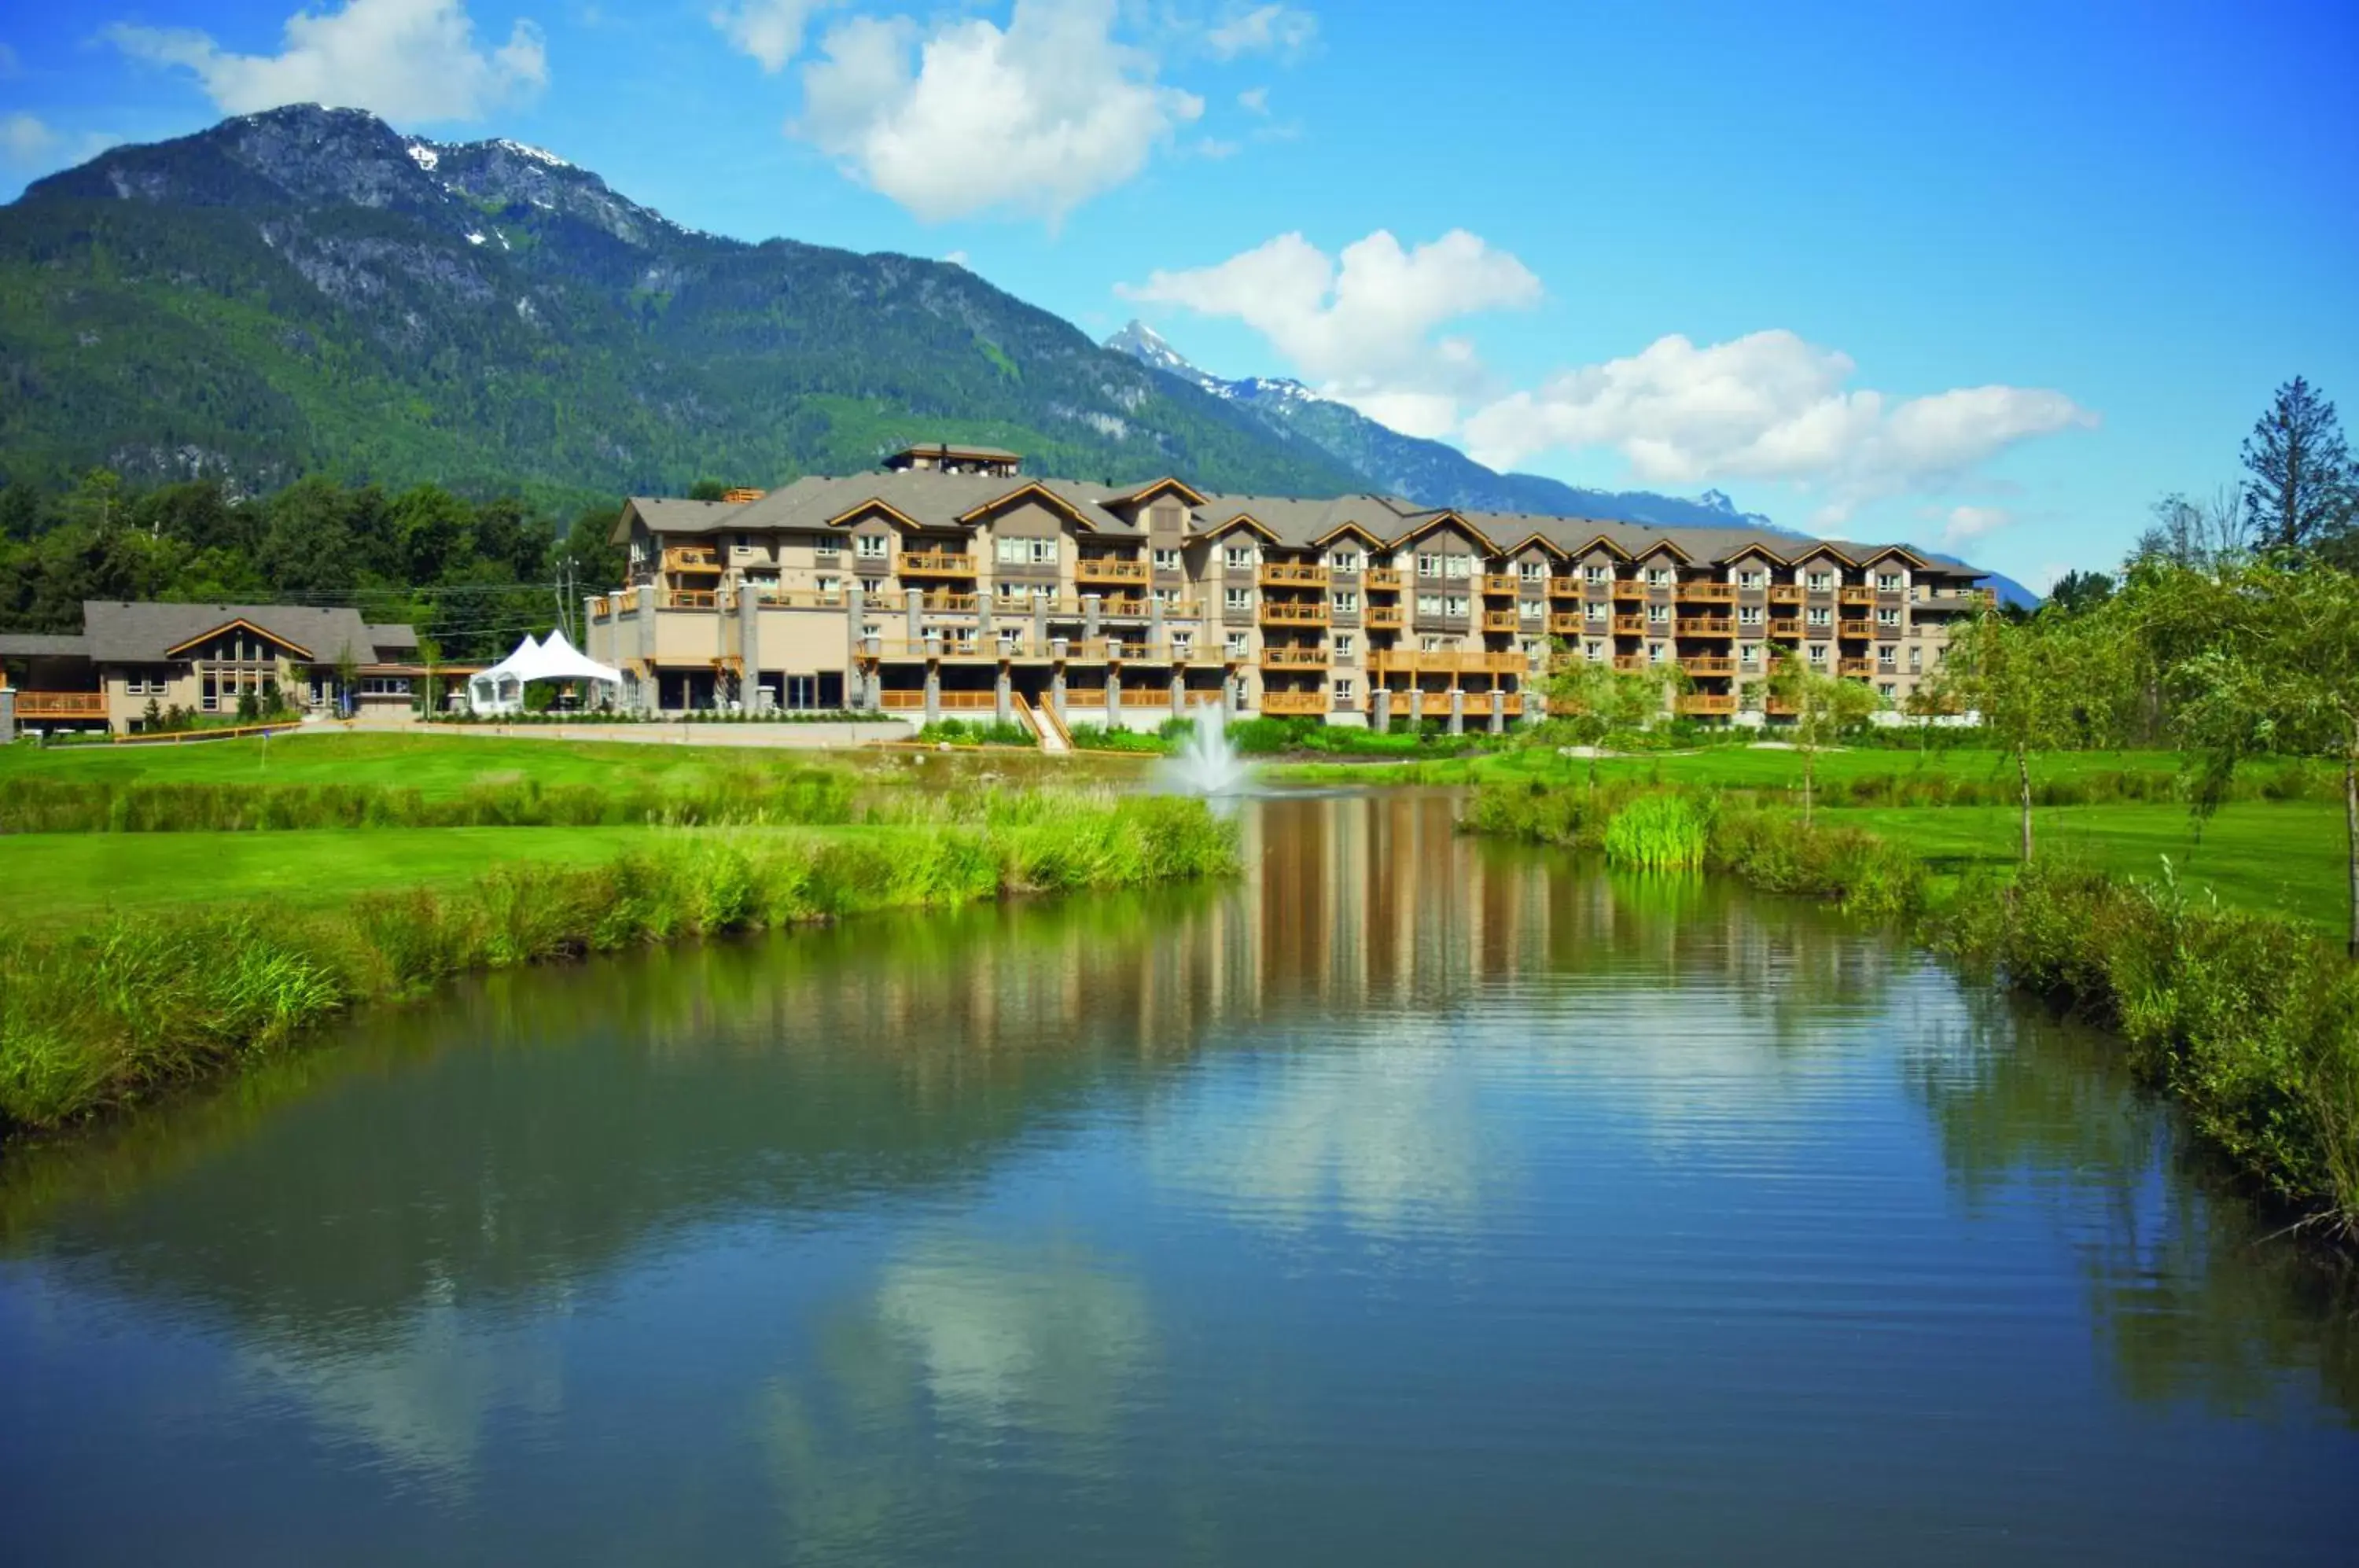 Property building in Executive Suites Hotel and Resort, Squamish